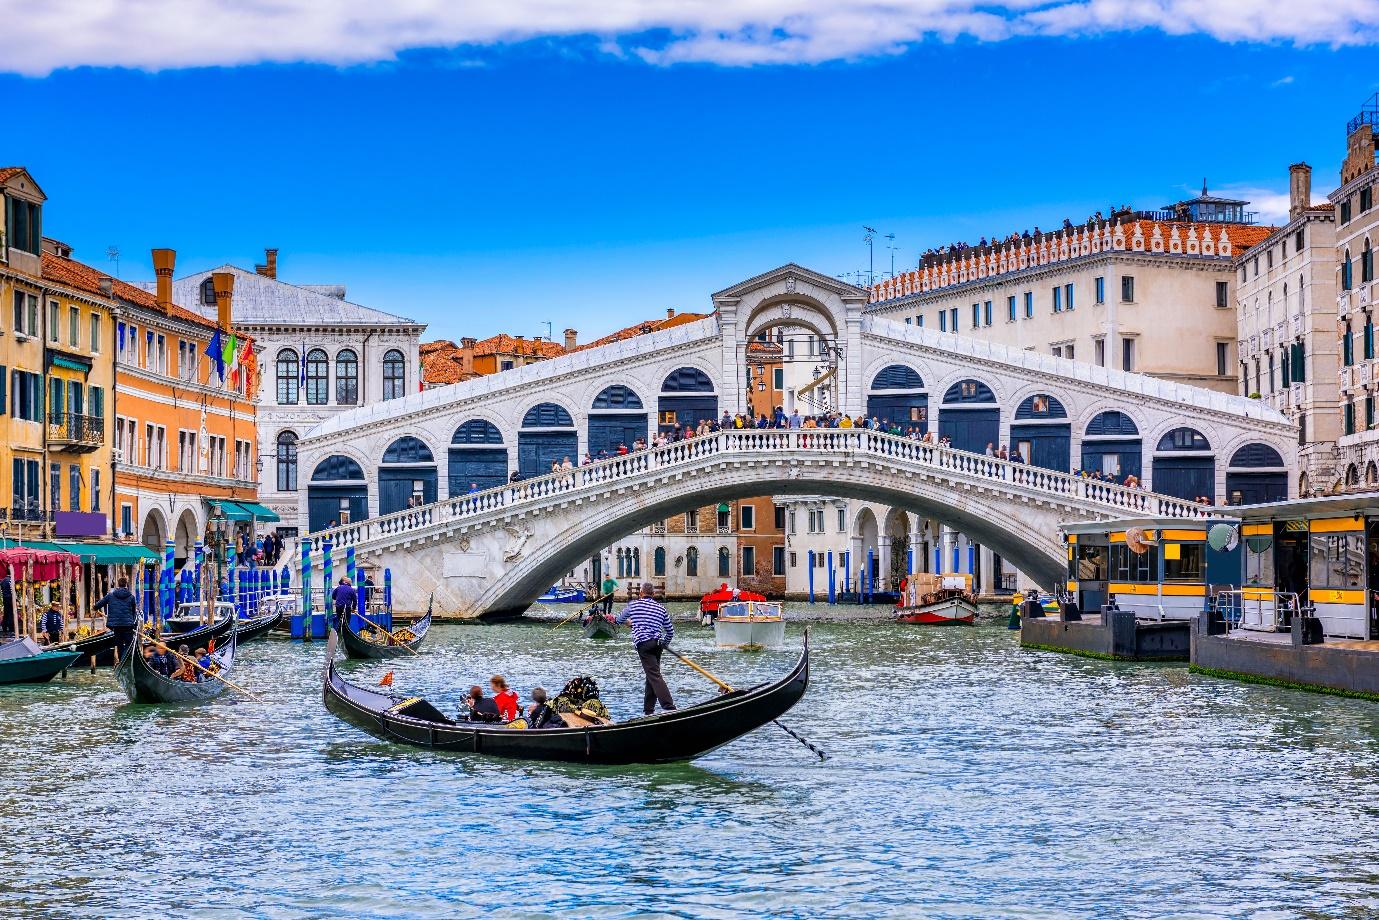 Rialto Bridge over a canal with boats and buildings

Description automatically generated